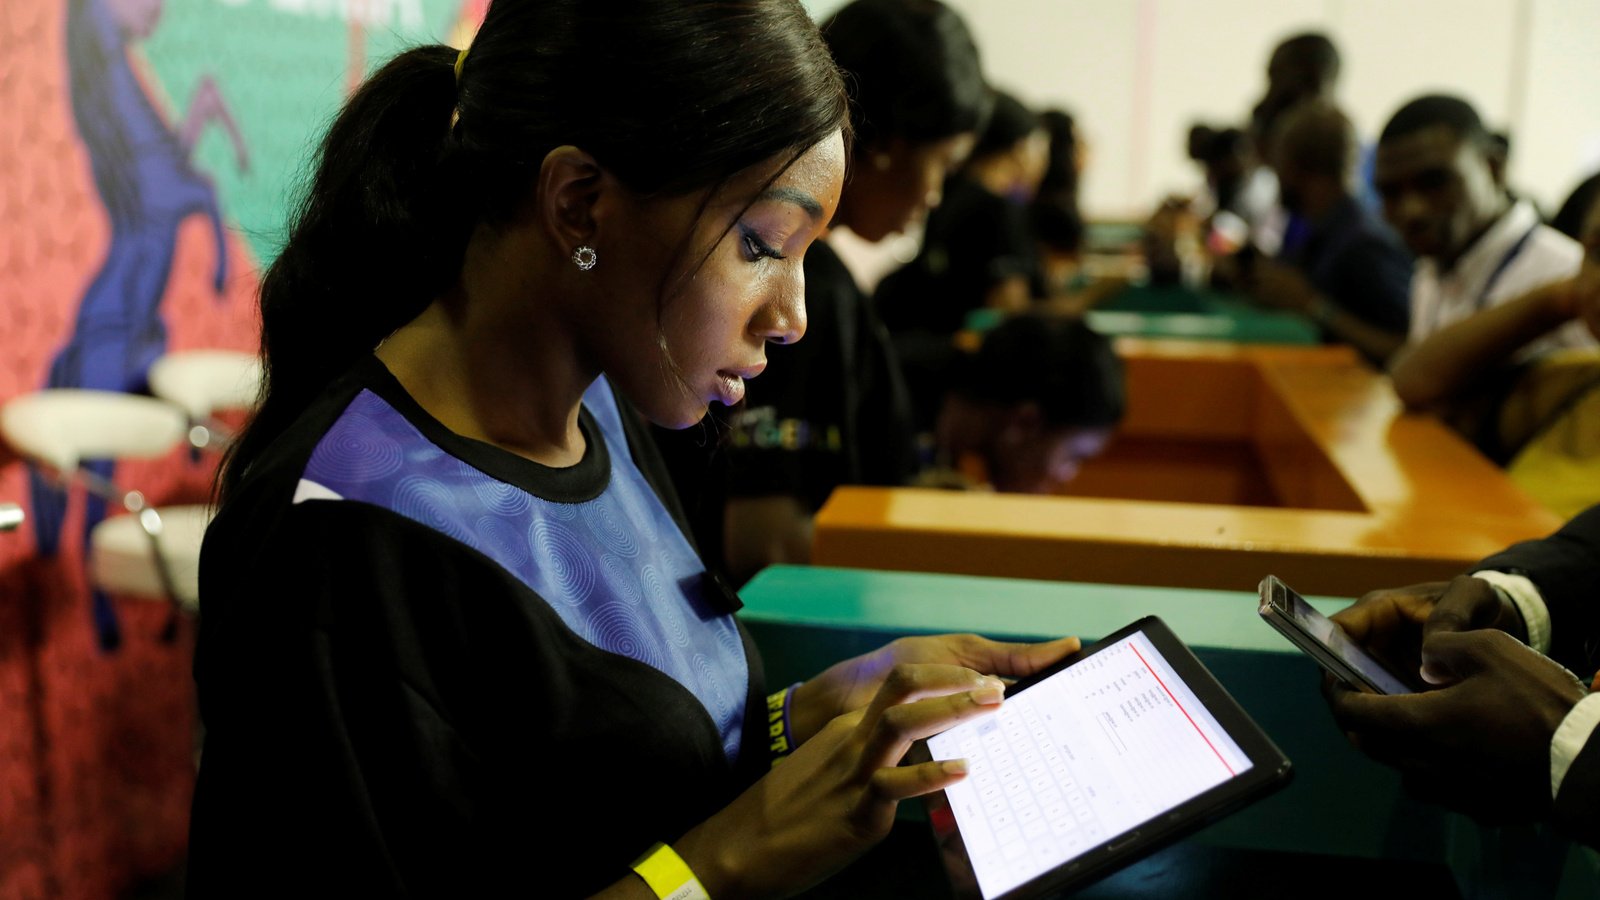 Filipina Teen Student - Gender Bias Inside the Digital Revolution: Human Rights and Women's Rights  Online | Council on Foreign Relations